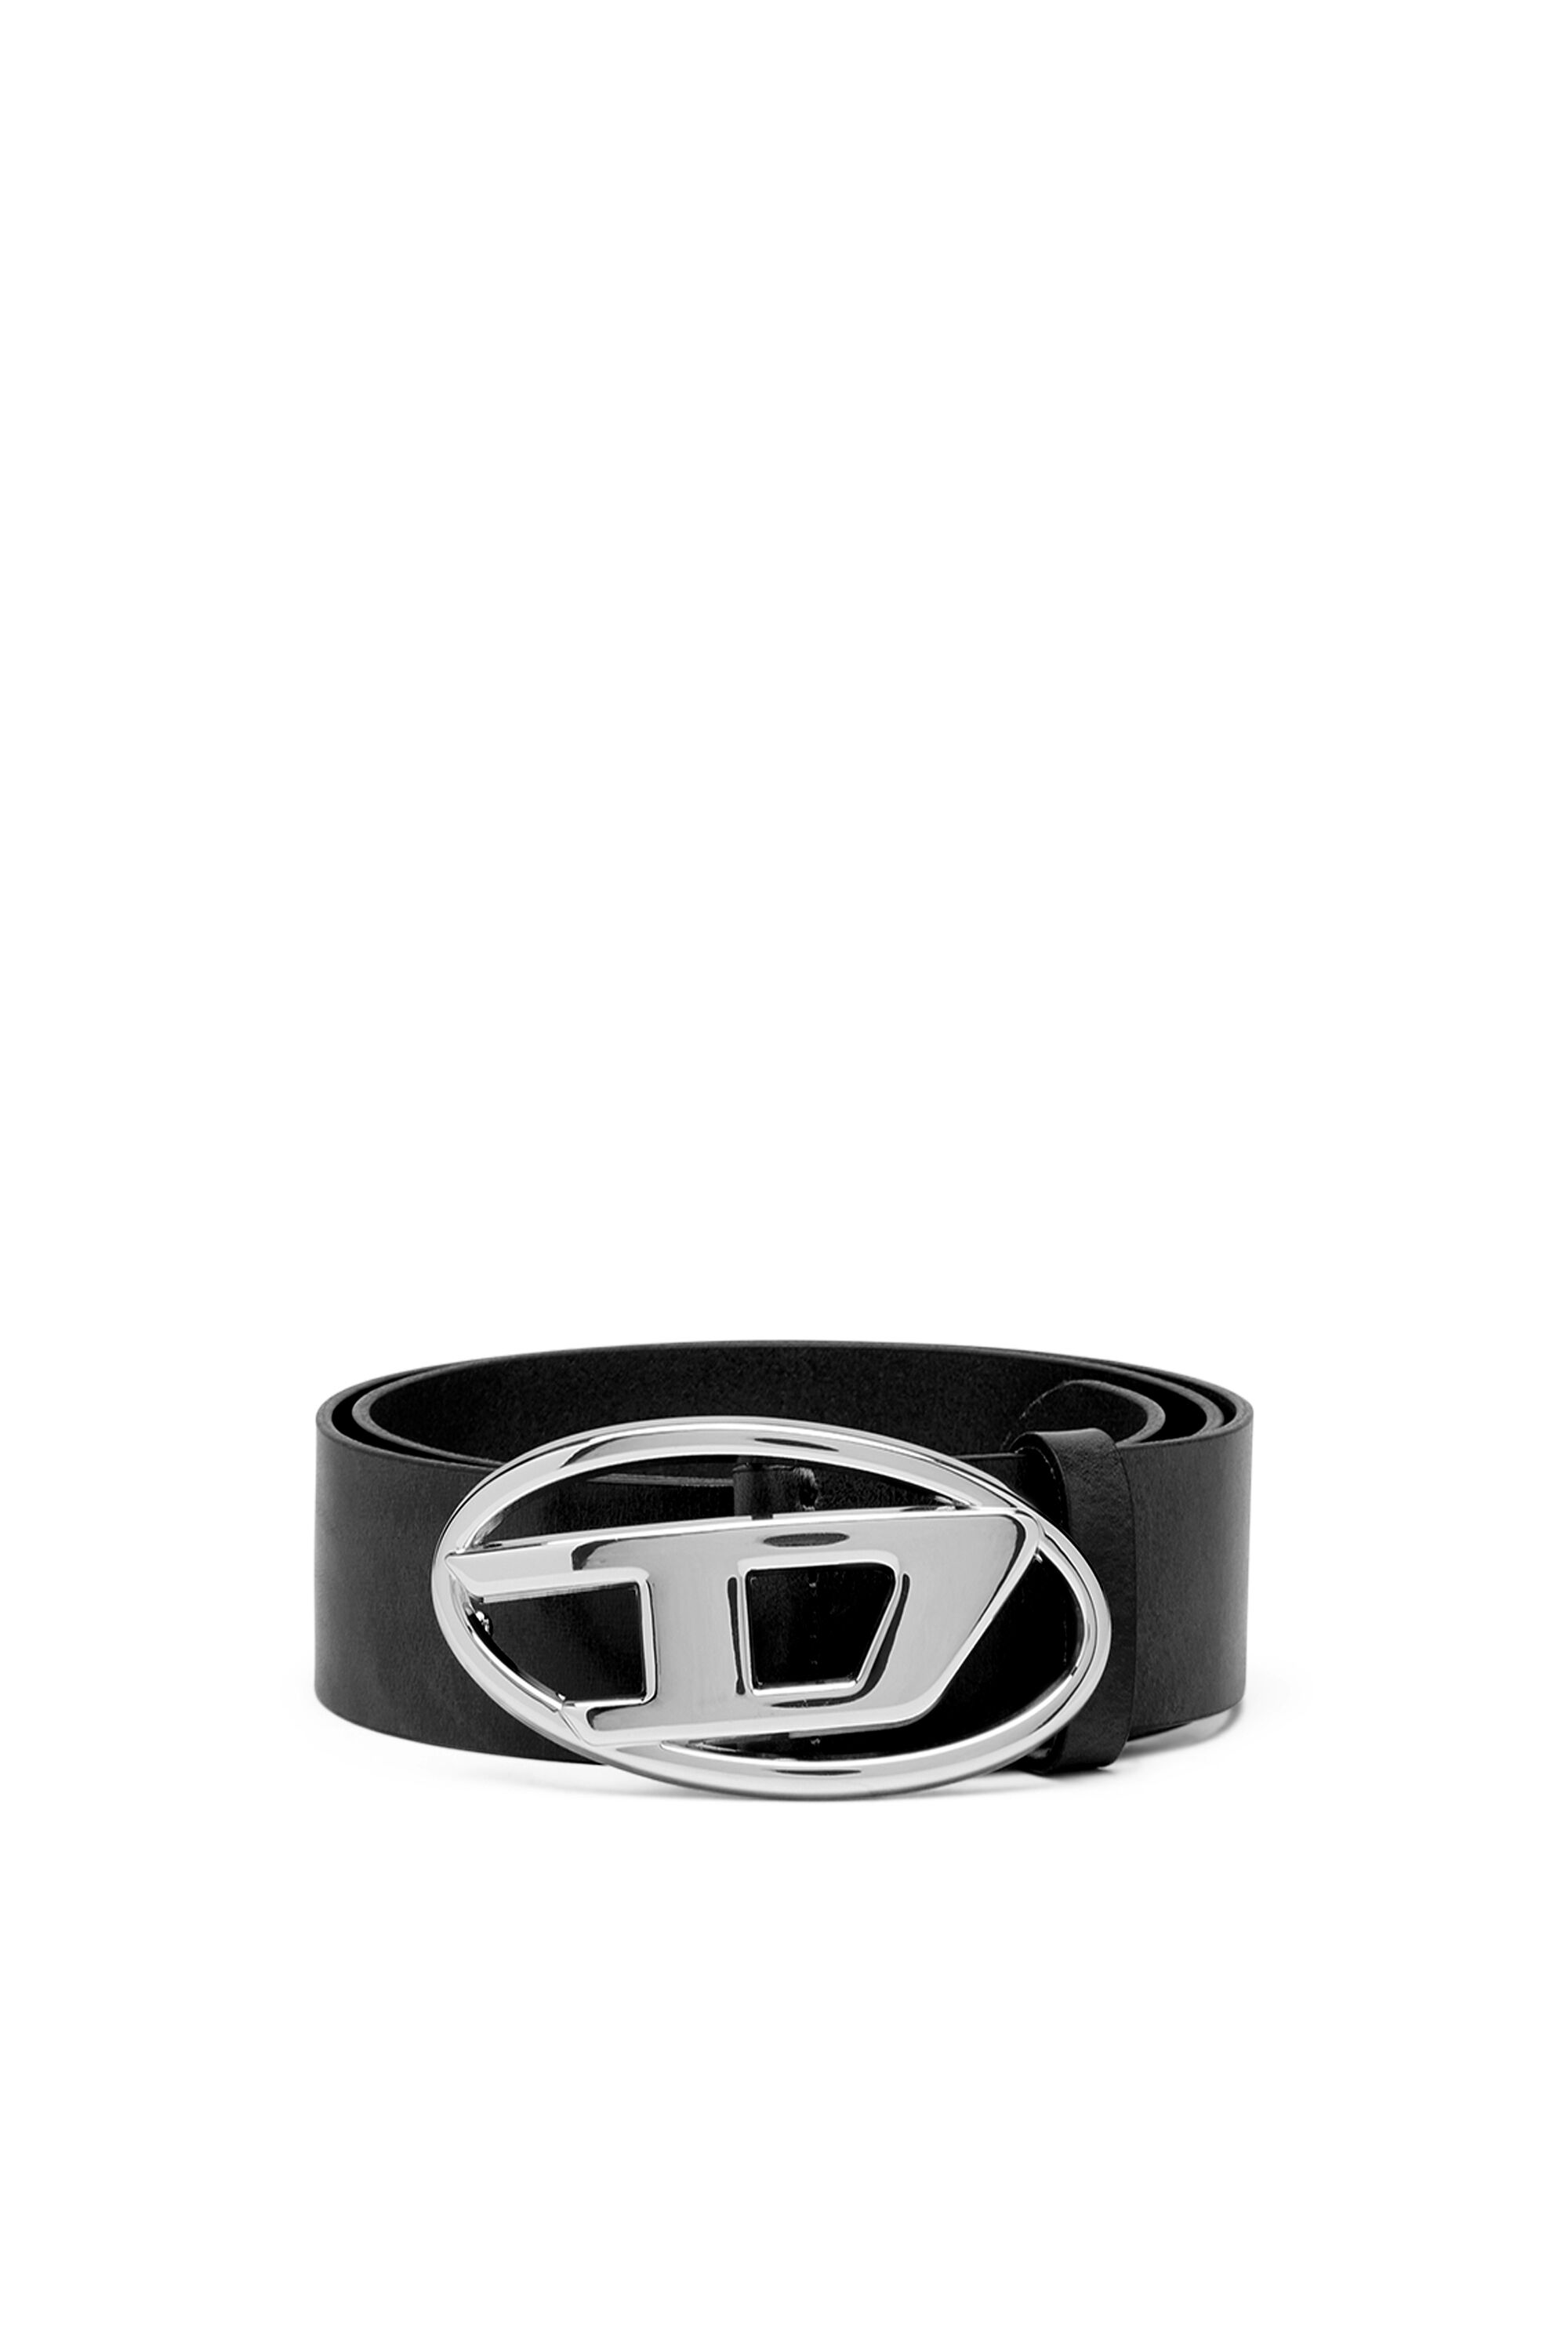 | silver B-1DR with D Woman: leather buckle Belt logo Diesel